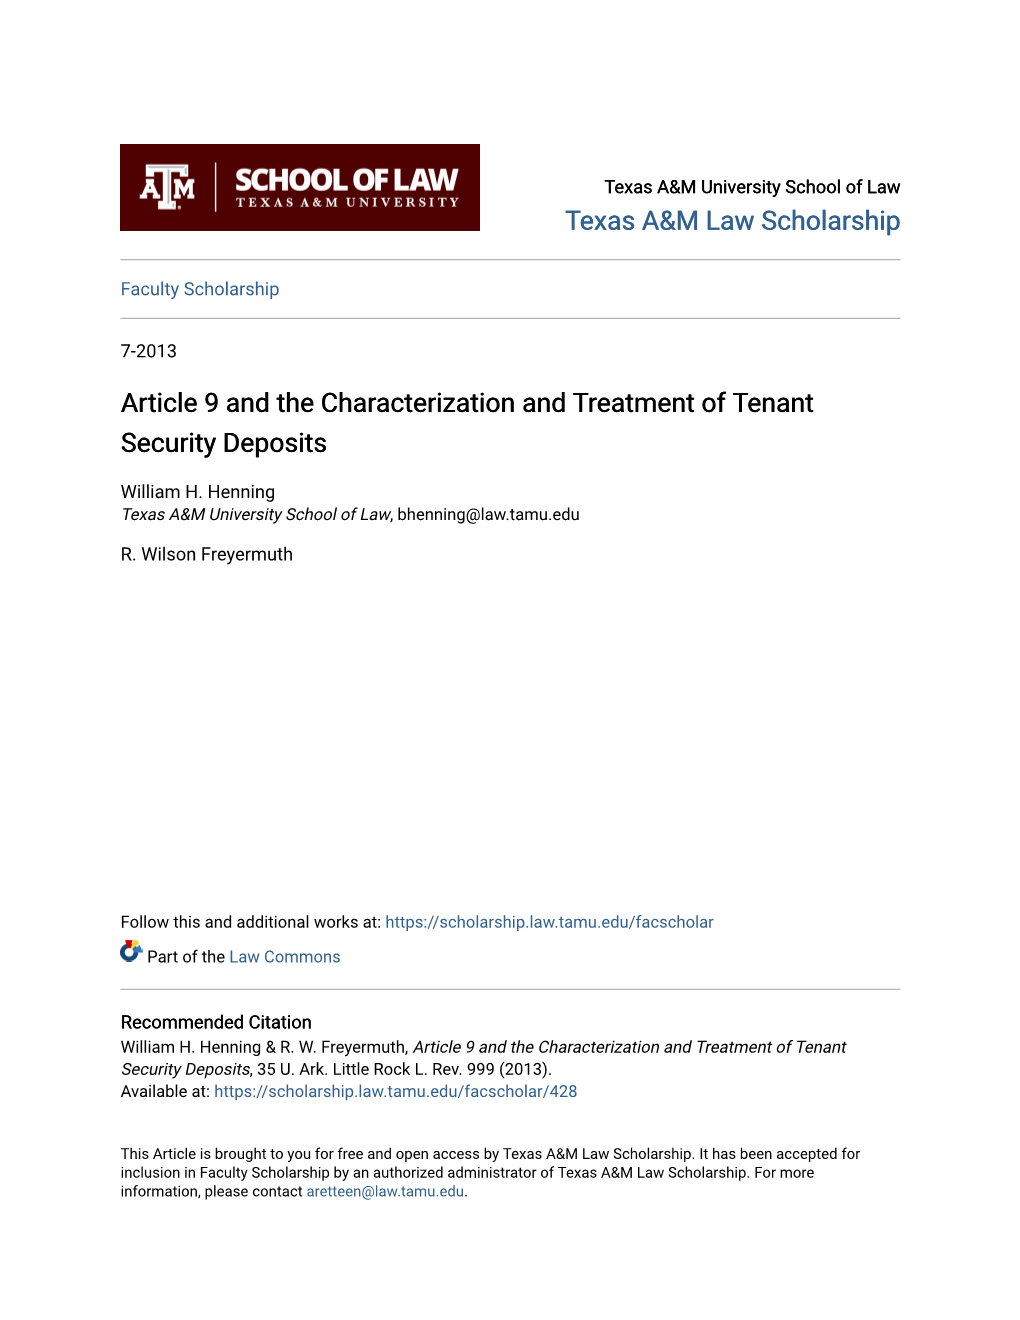 Article 9 and the Characterization and Treatment of Tenant Security Deposits